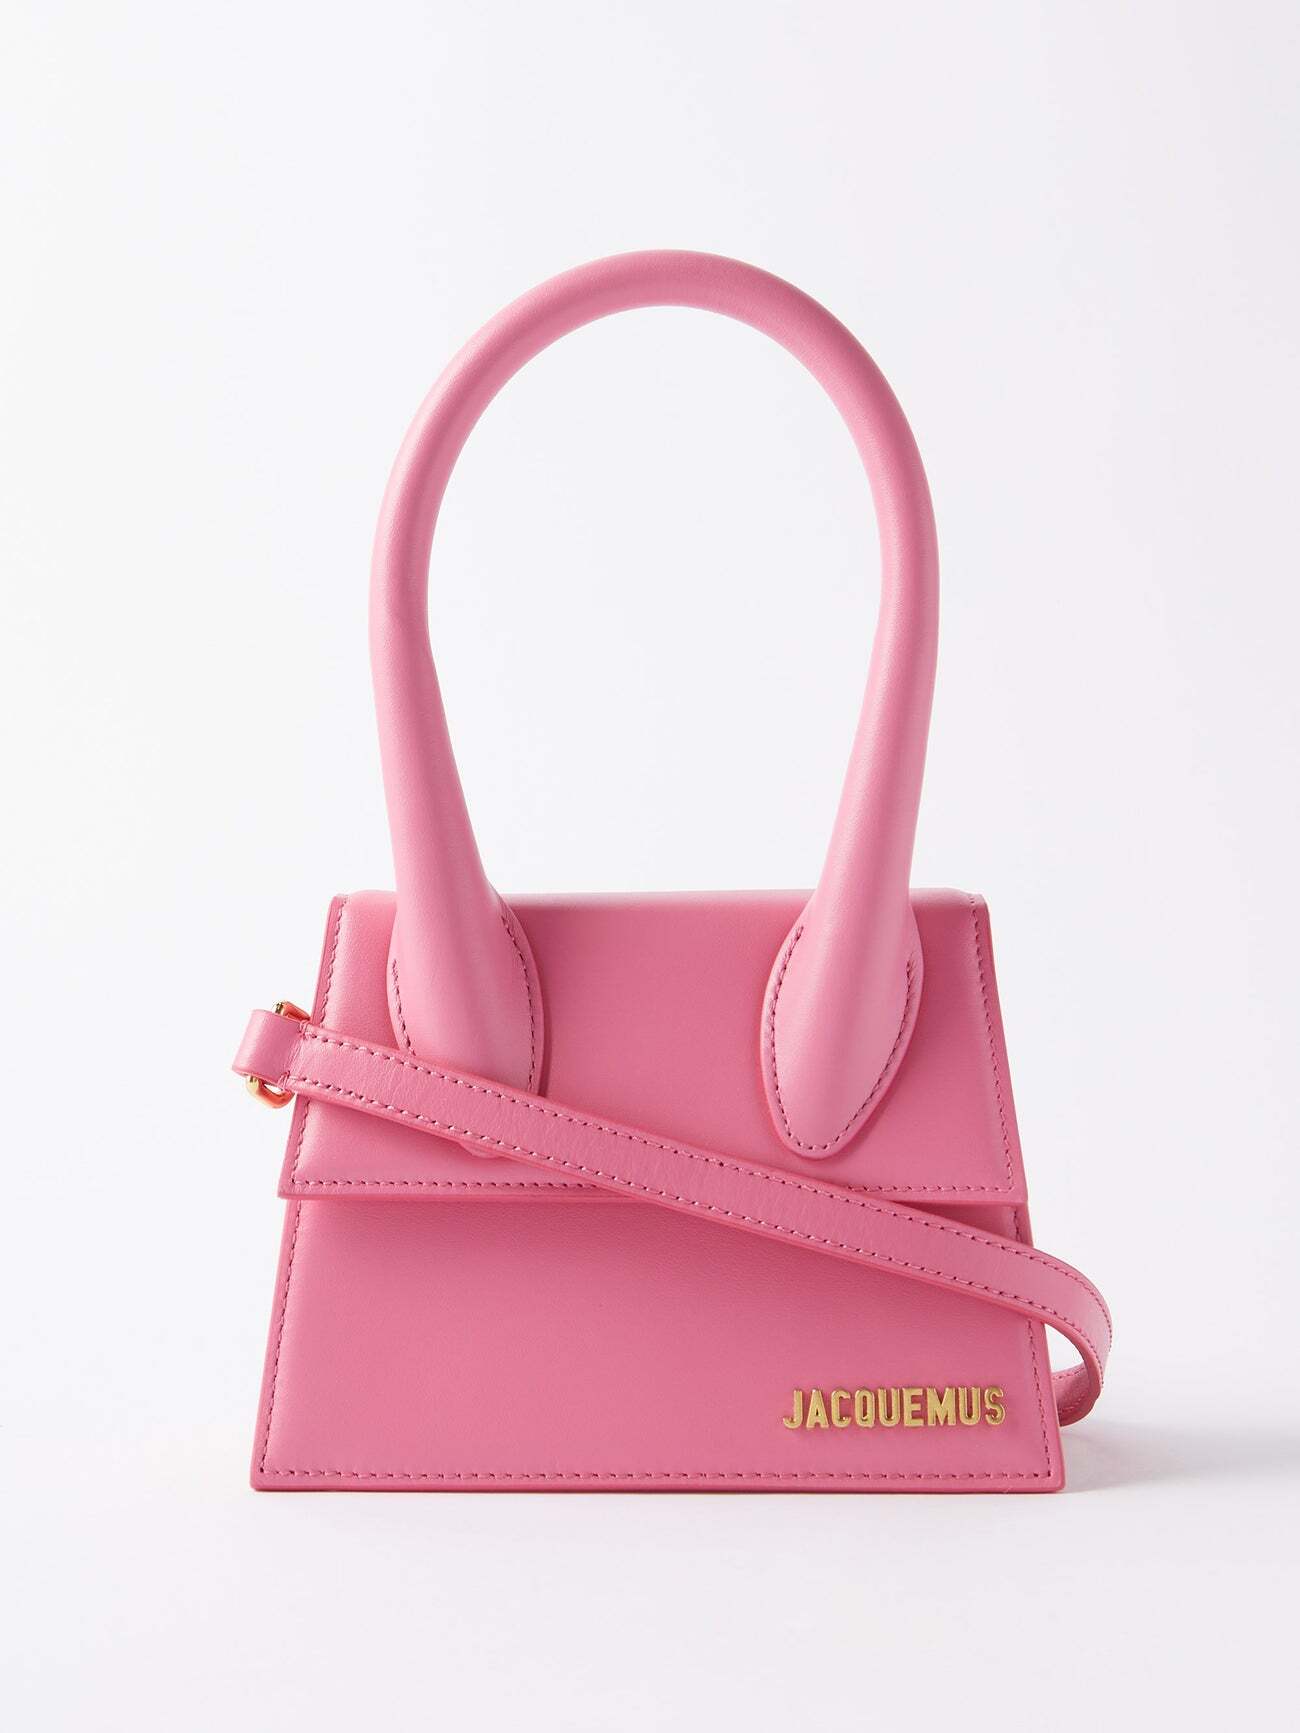 Jacquemus - Chiquito Mini Leather Bag - Womens - Pink